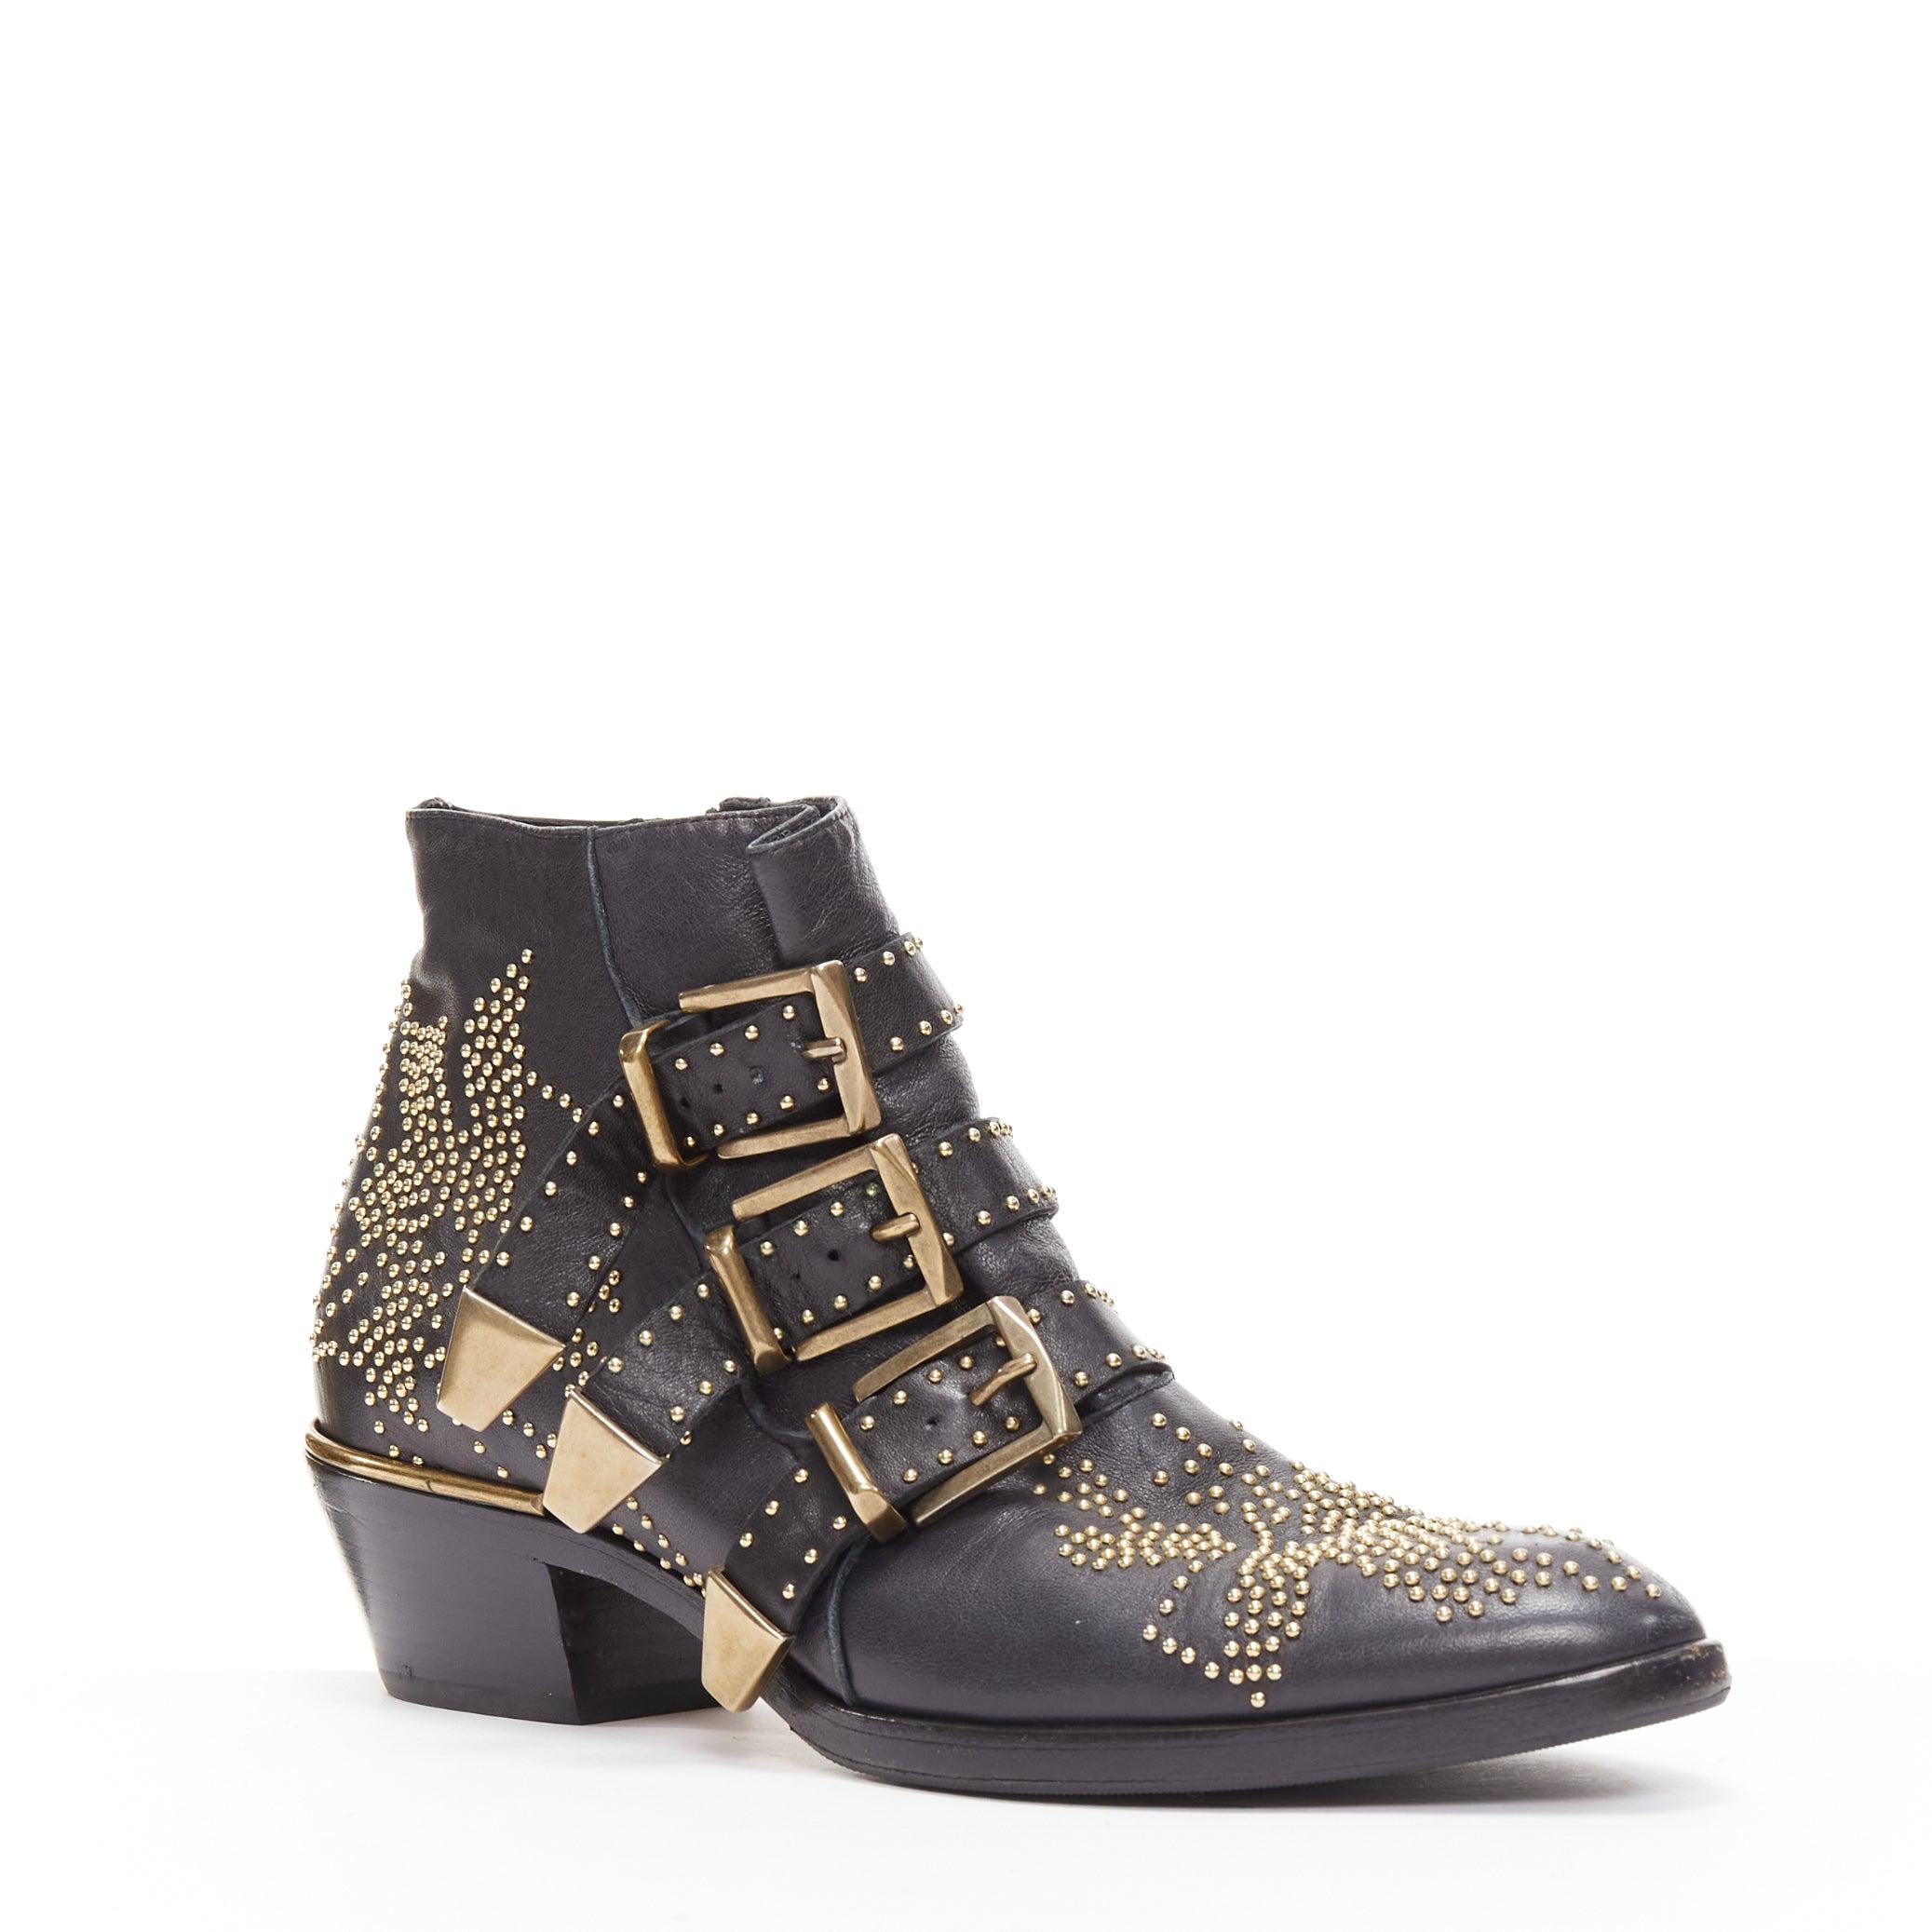 CHLOE Susanna black gold micro stud floral embellished buckle ankle boot EU37
Reference: NKLL/A00114
Brand: Chloe
Model: Susanna
Material: Leather, Metal
Color: Black, Gold
Pattern: Floral
Closure: Zip
Lining: Black Leather
Extra Details: